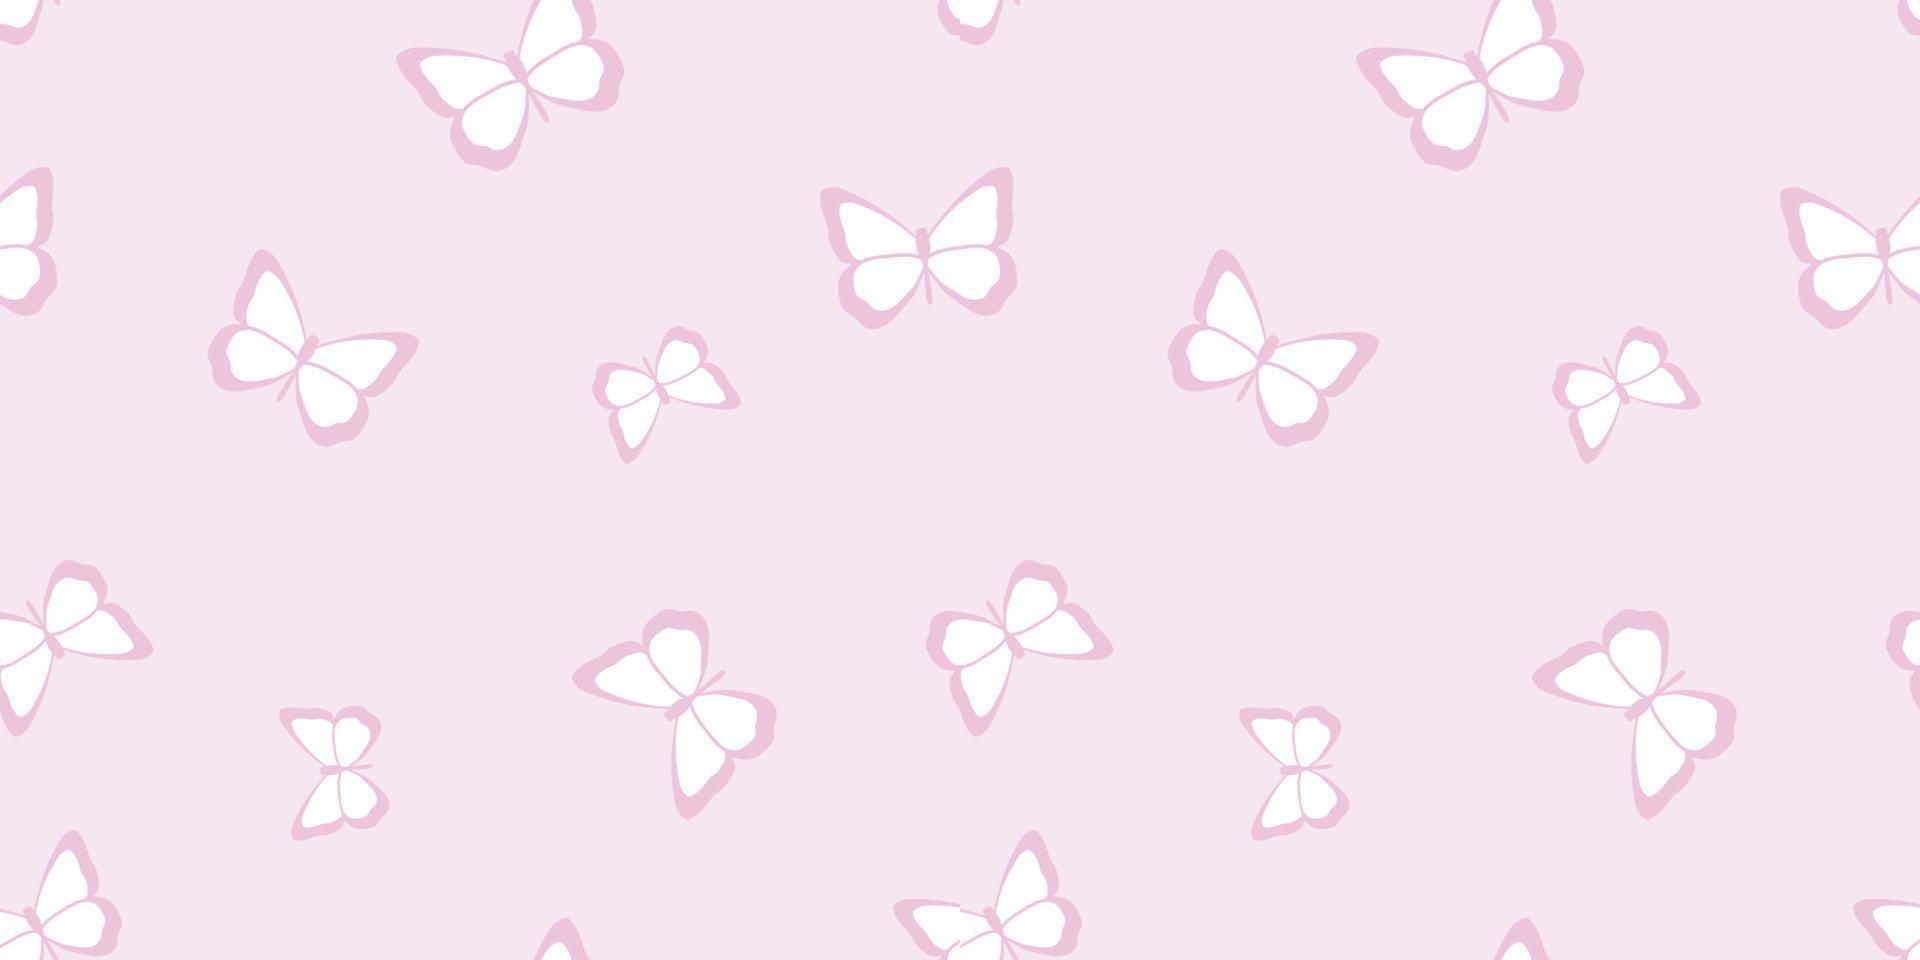 Butterfly seamless repeat pattern background vector